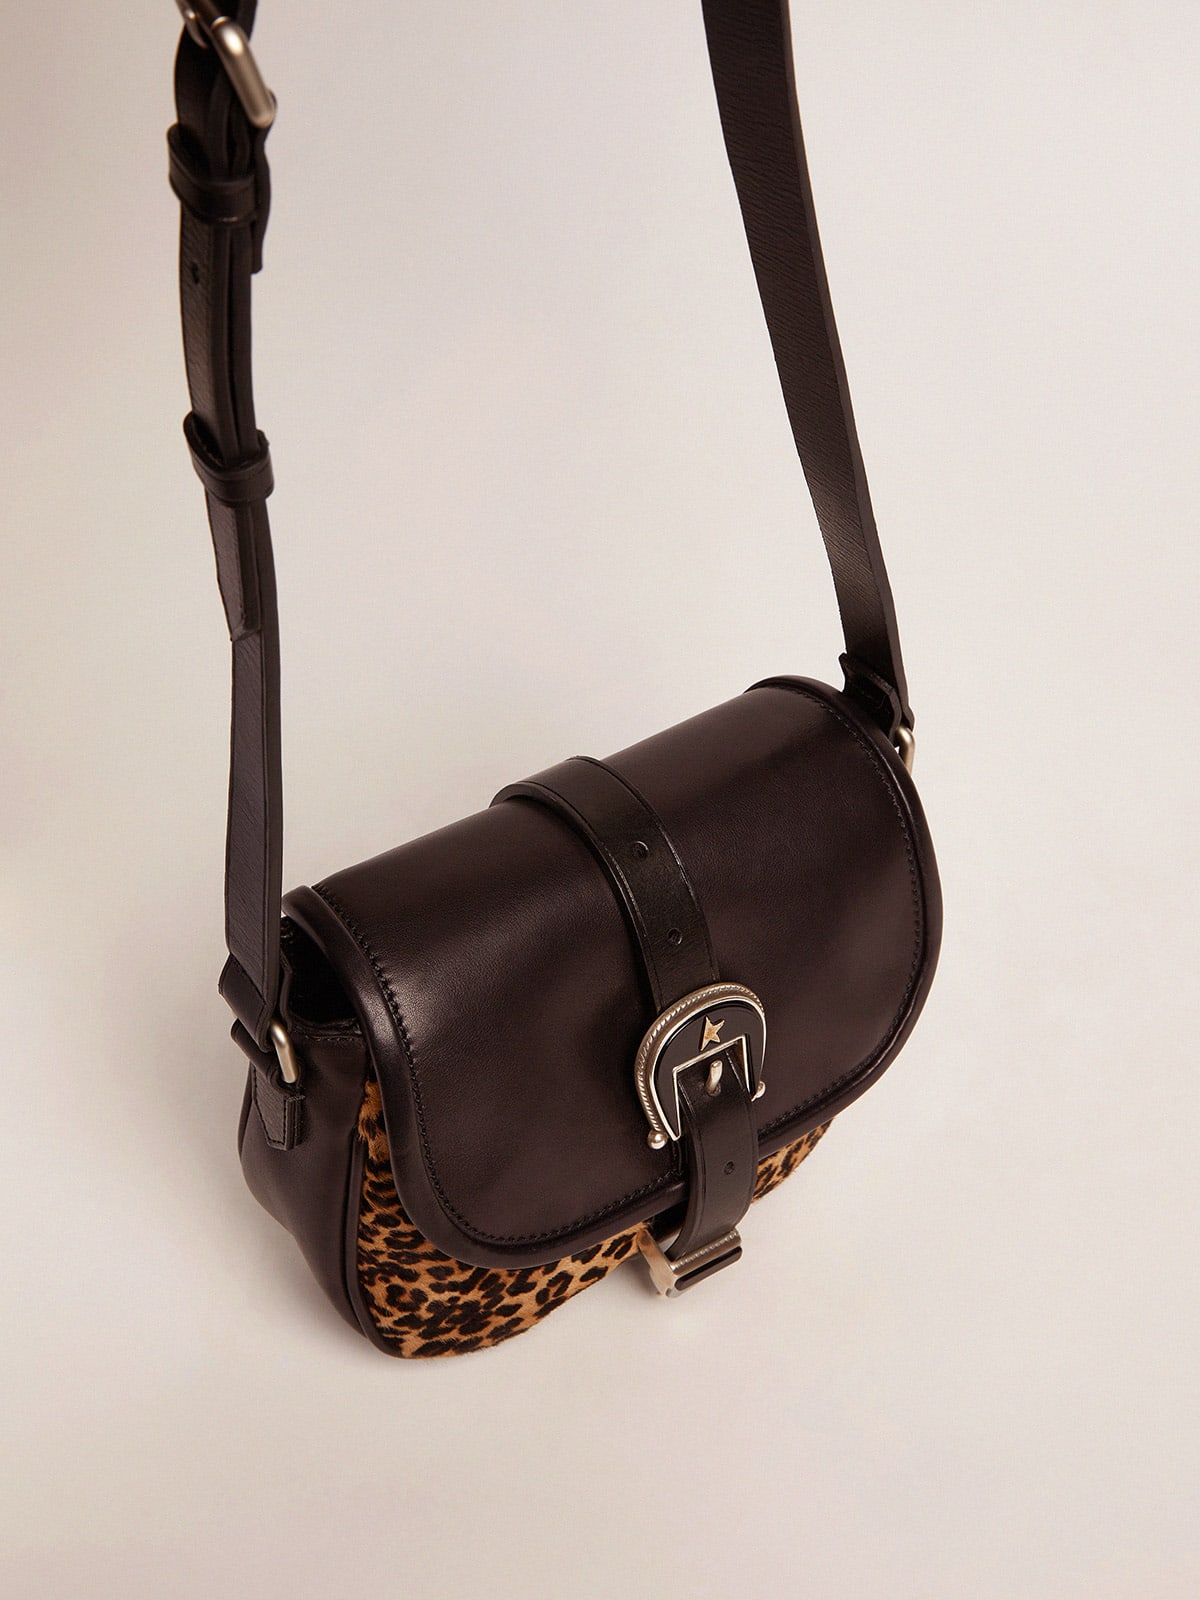 Golden Goose - Small Rodeo Bag in black leather and leopard-print pony skin in 